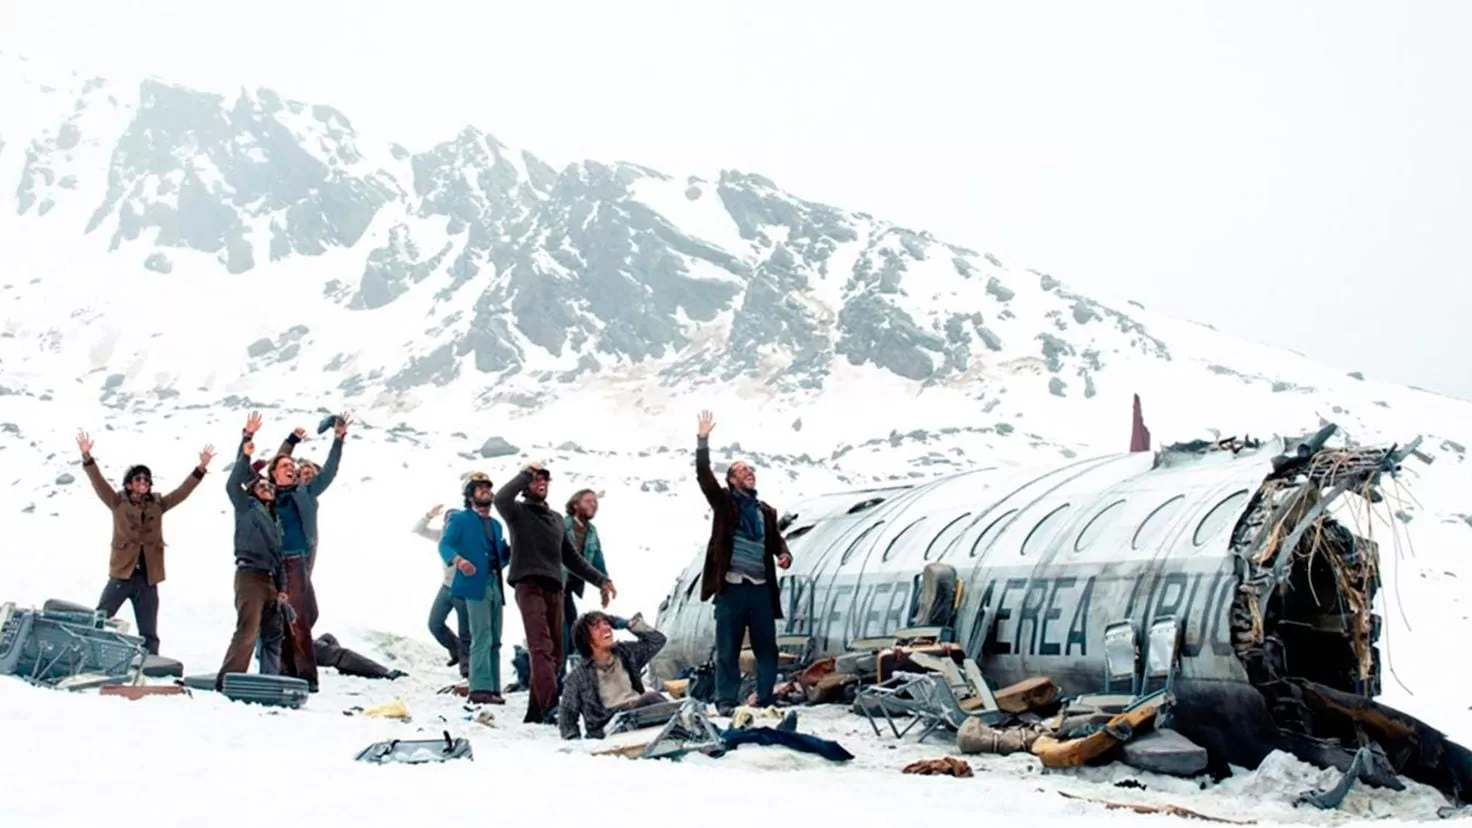 The real story of The Snow Society: this was the tragedy of the accident in the Andes
